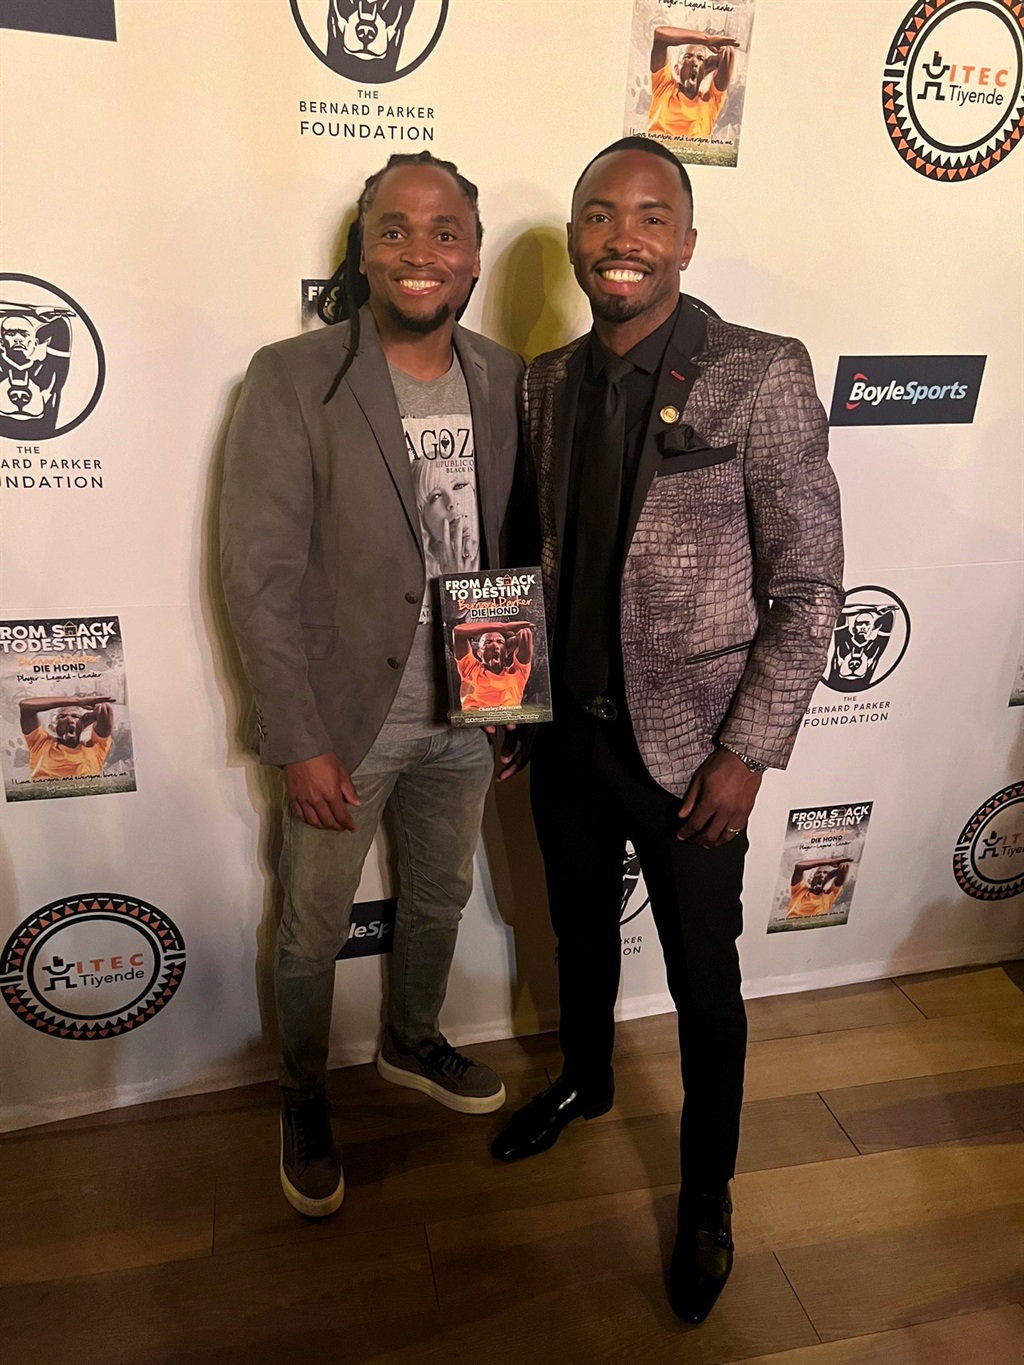 Bernard Parker launched his autobiography on Thursday evening, with his former Kaizer Chiefs teammates in attendance along with other influential figures and supporters.